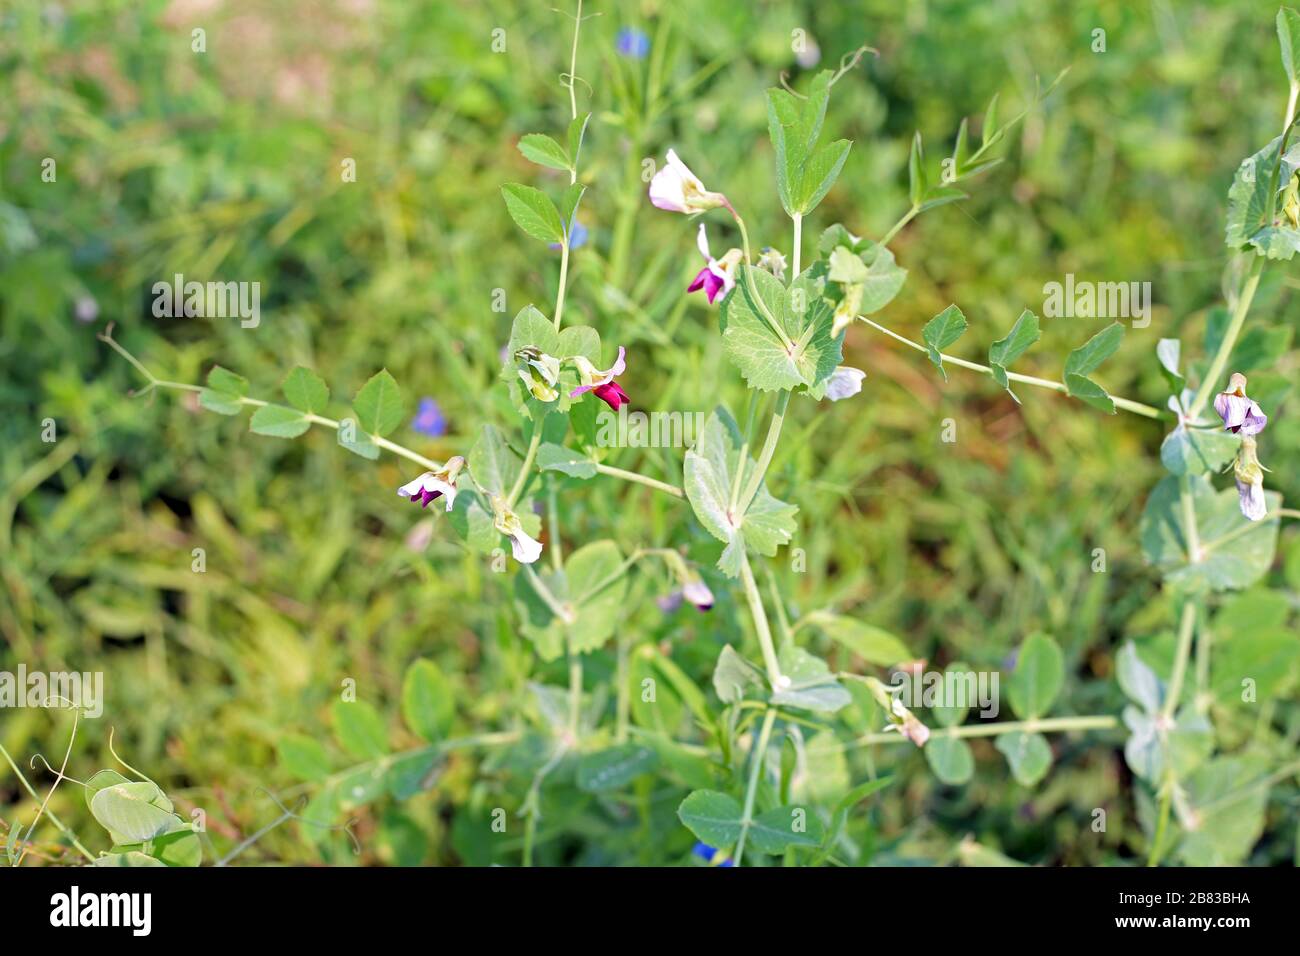 Peas growing in a field on sunny day Stock Photo